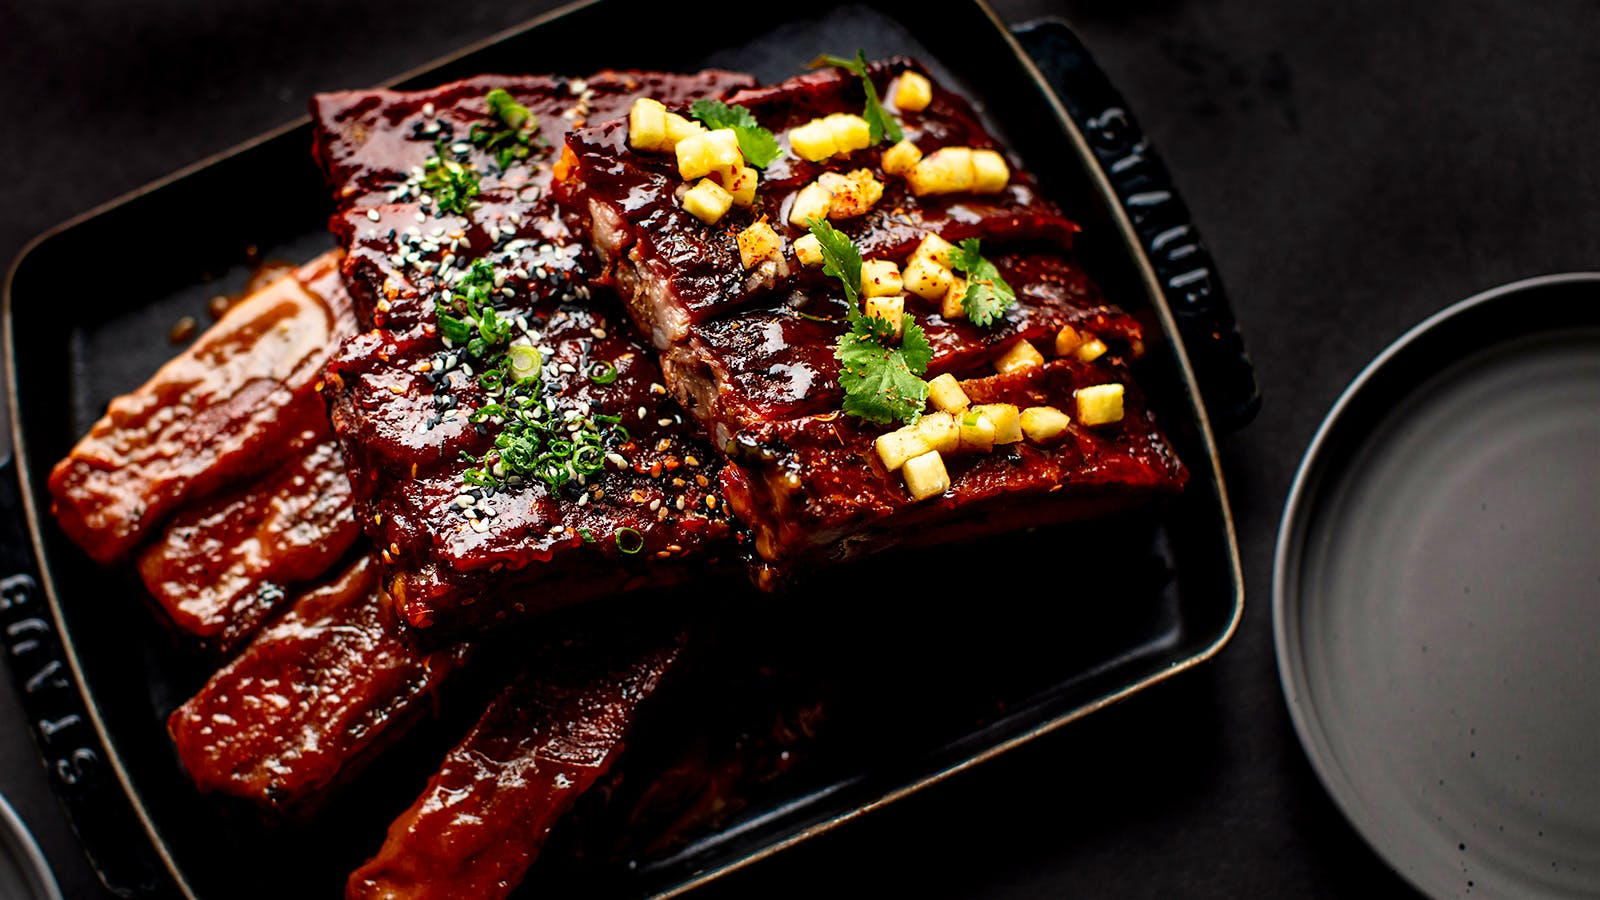 Michael Mina’s Timeless July Fourth Feast: Barbecue Ribs and Jalapeño Creamed Corn